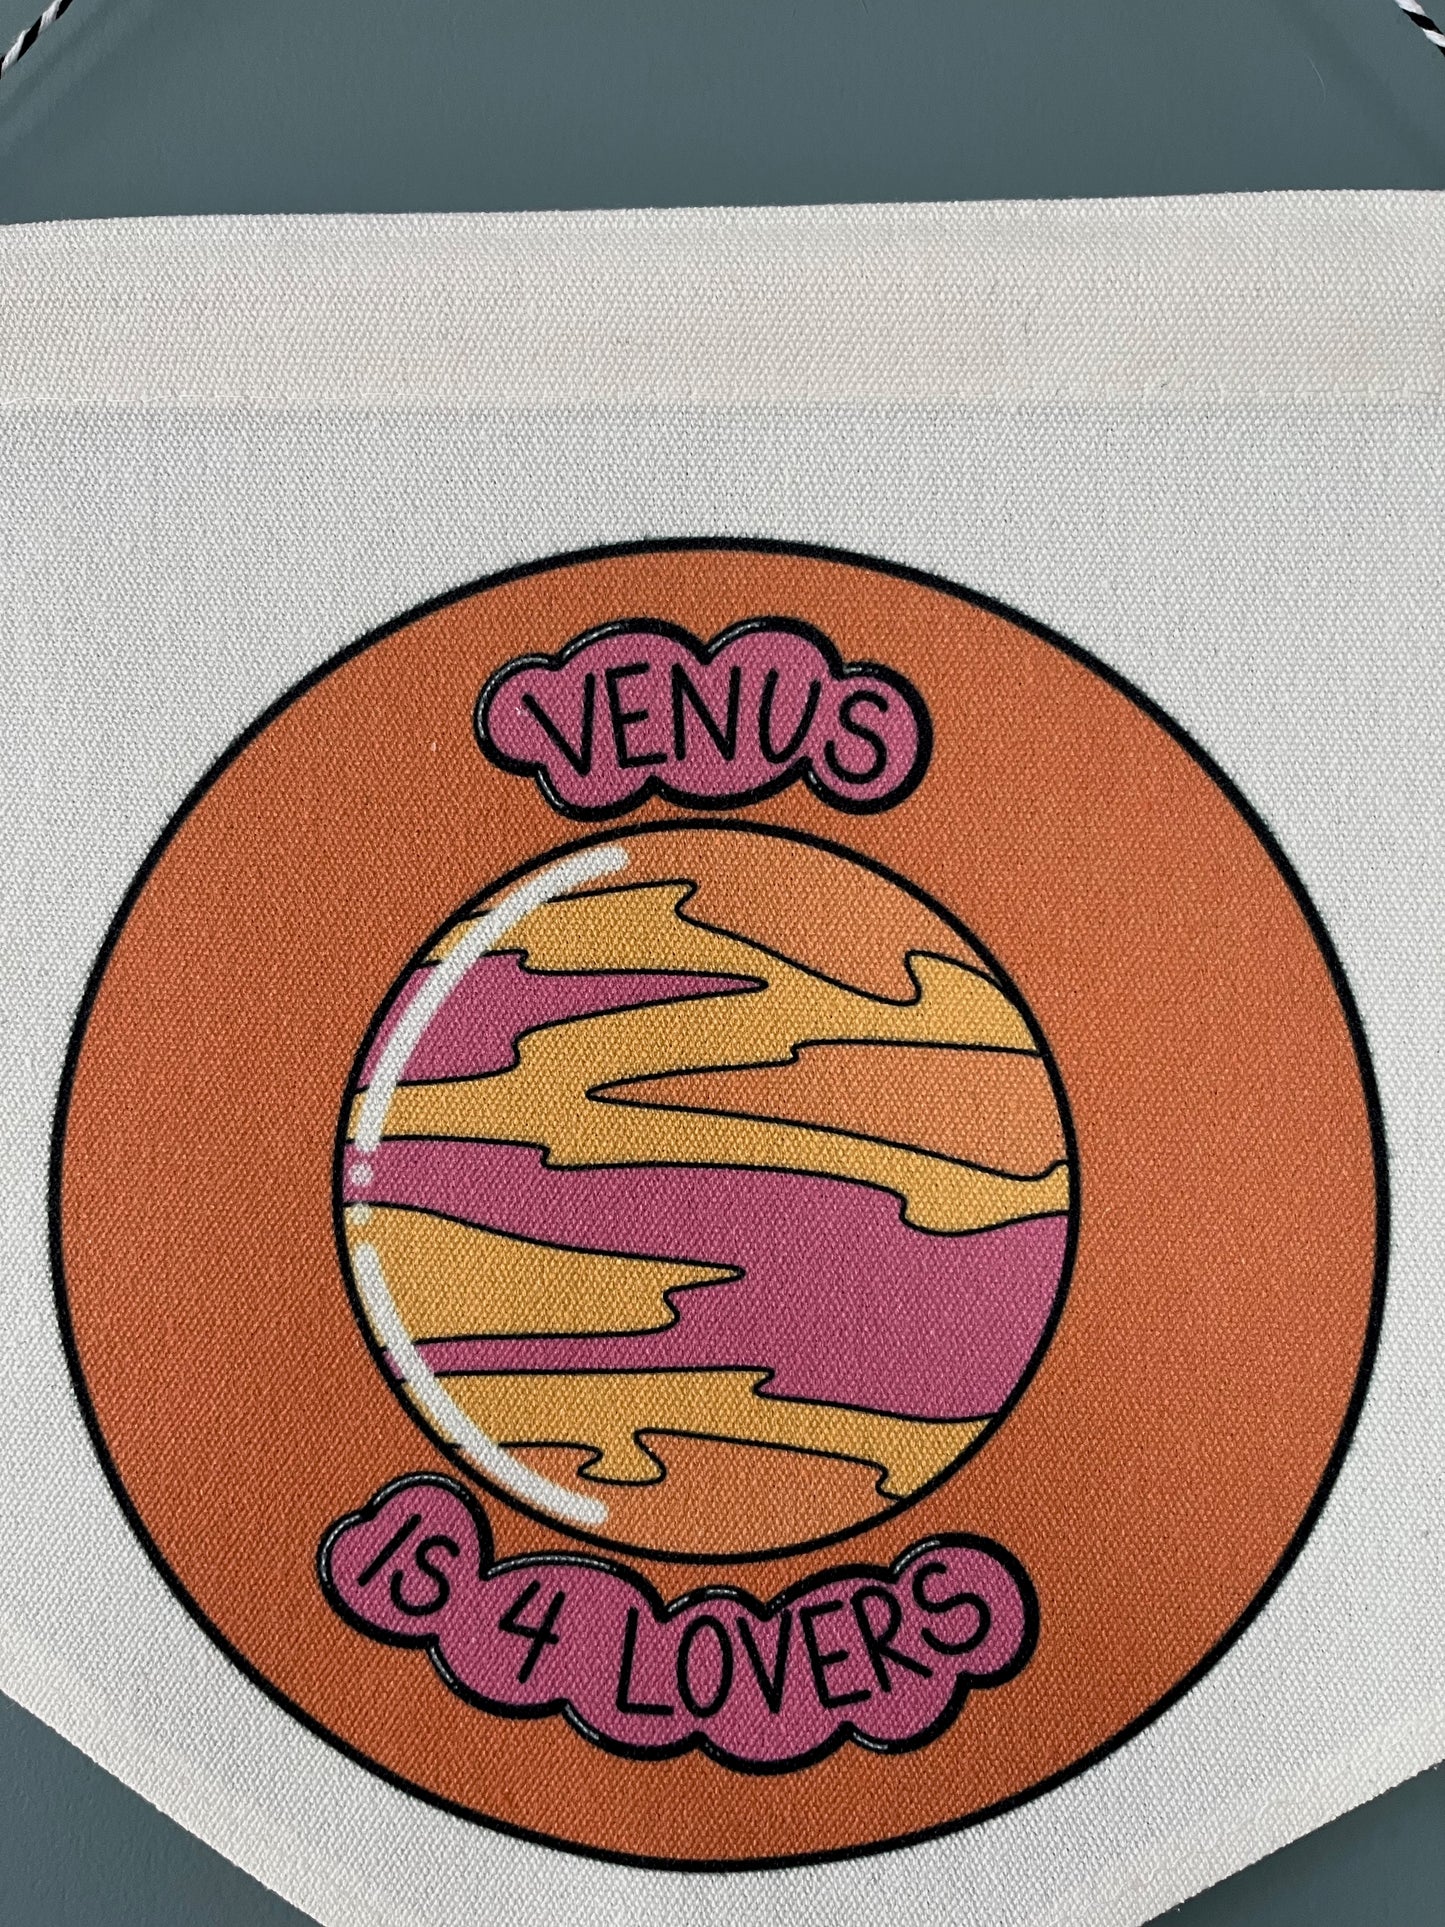 Canvas Banner - Venus is 4 Lovers: Get Your Love On, Baby! canvas banner from GemCadet